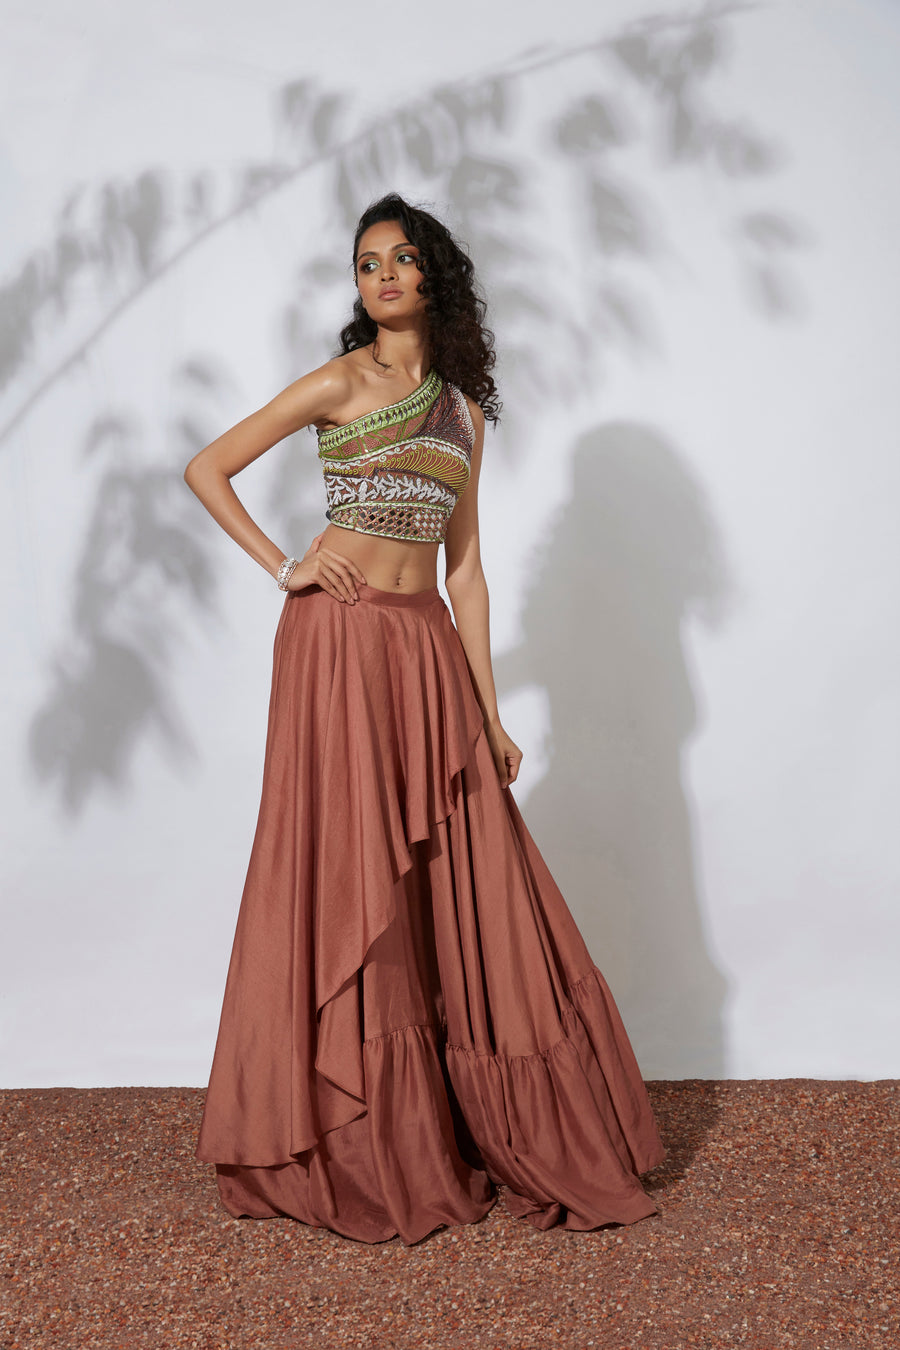 New Party Wear Lehenga Design Buy Online At Lowest Price